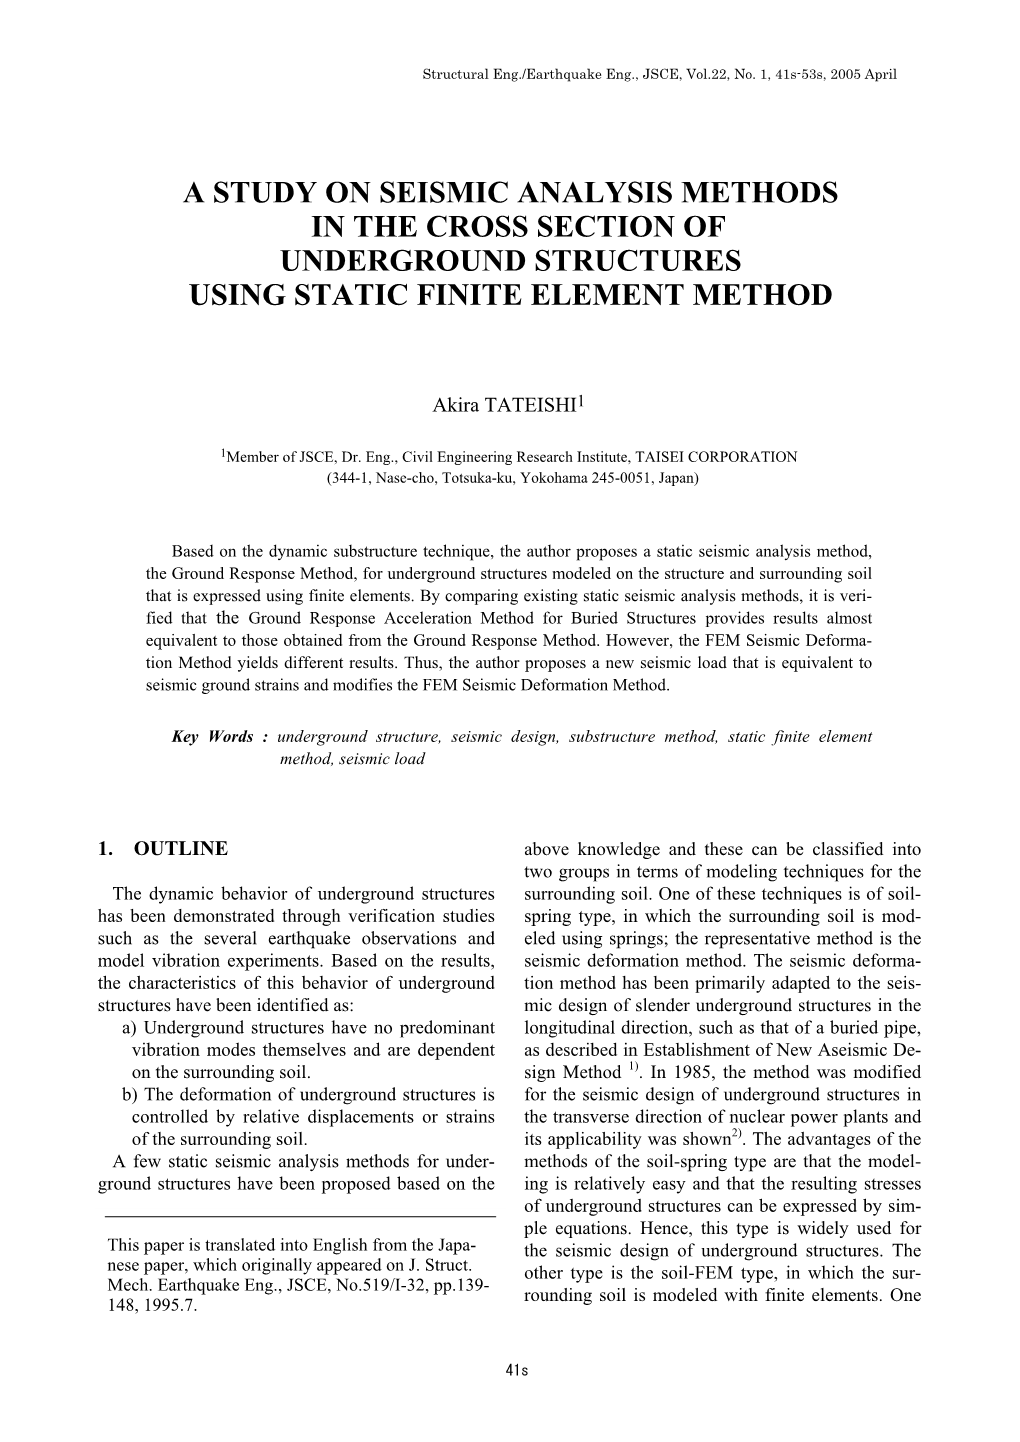 A Study on Seismic Analysis Methods in the Cross Section of Underground Structures Using Static Finite Element Method